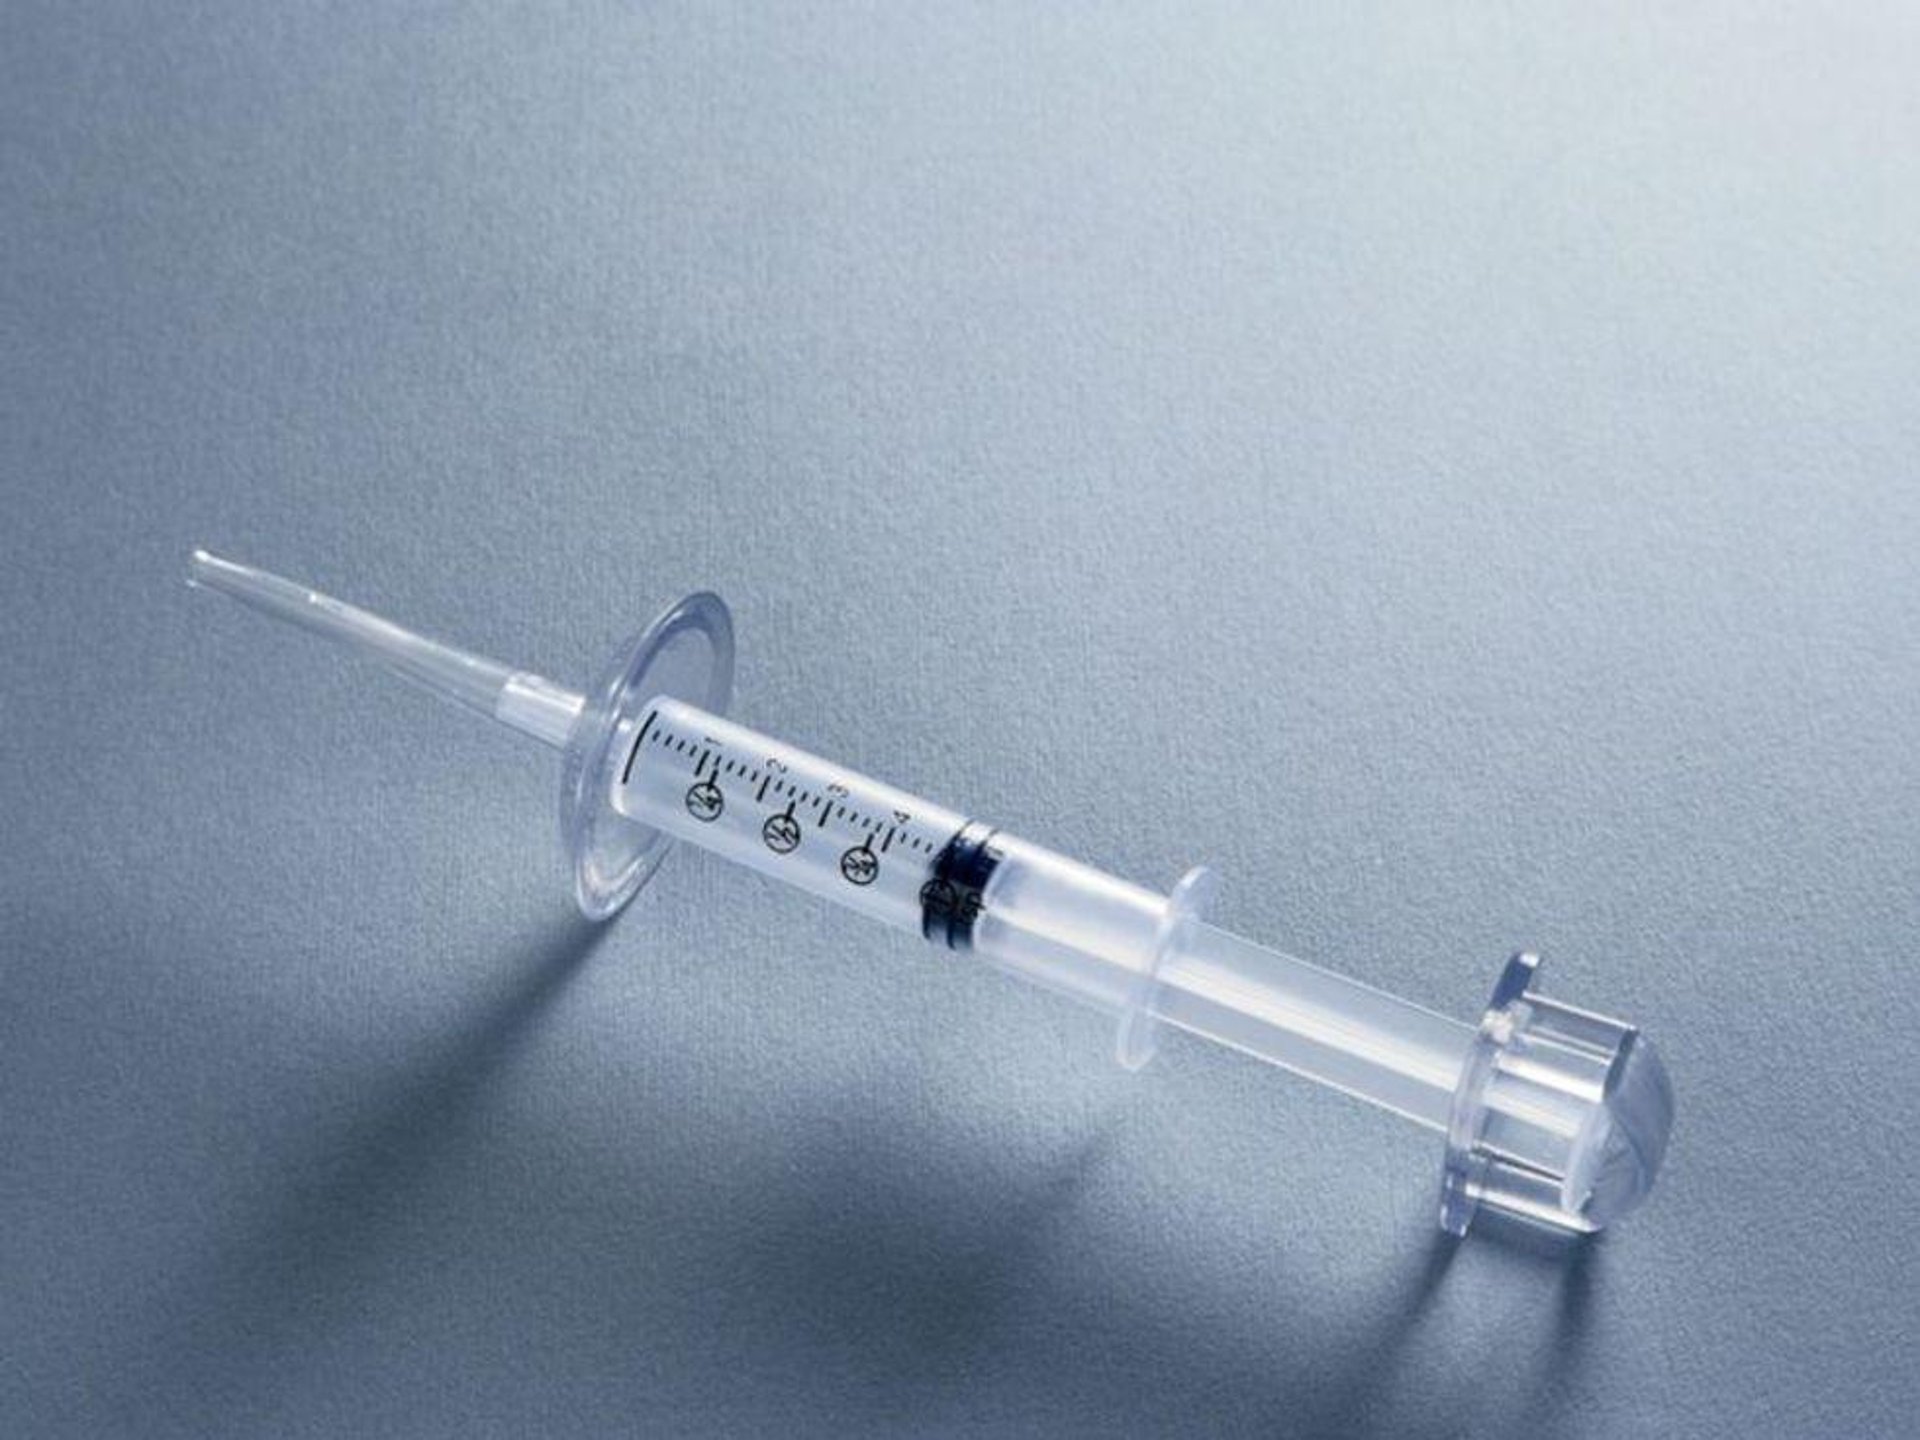  Study Suggests COVID Vaccine Booster Shots Will Be Needed